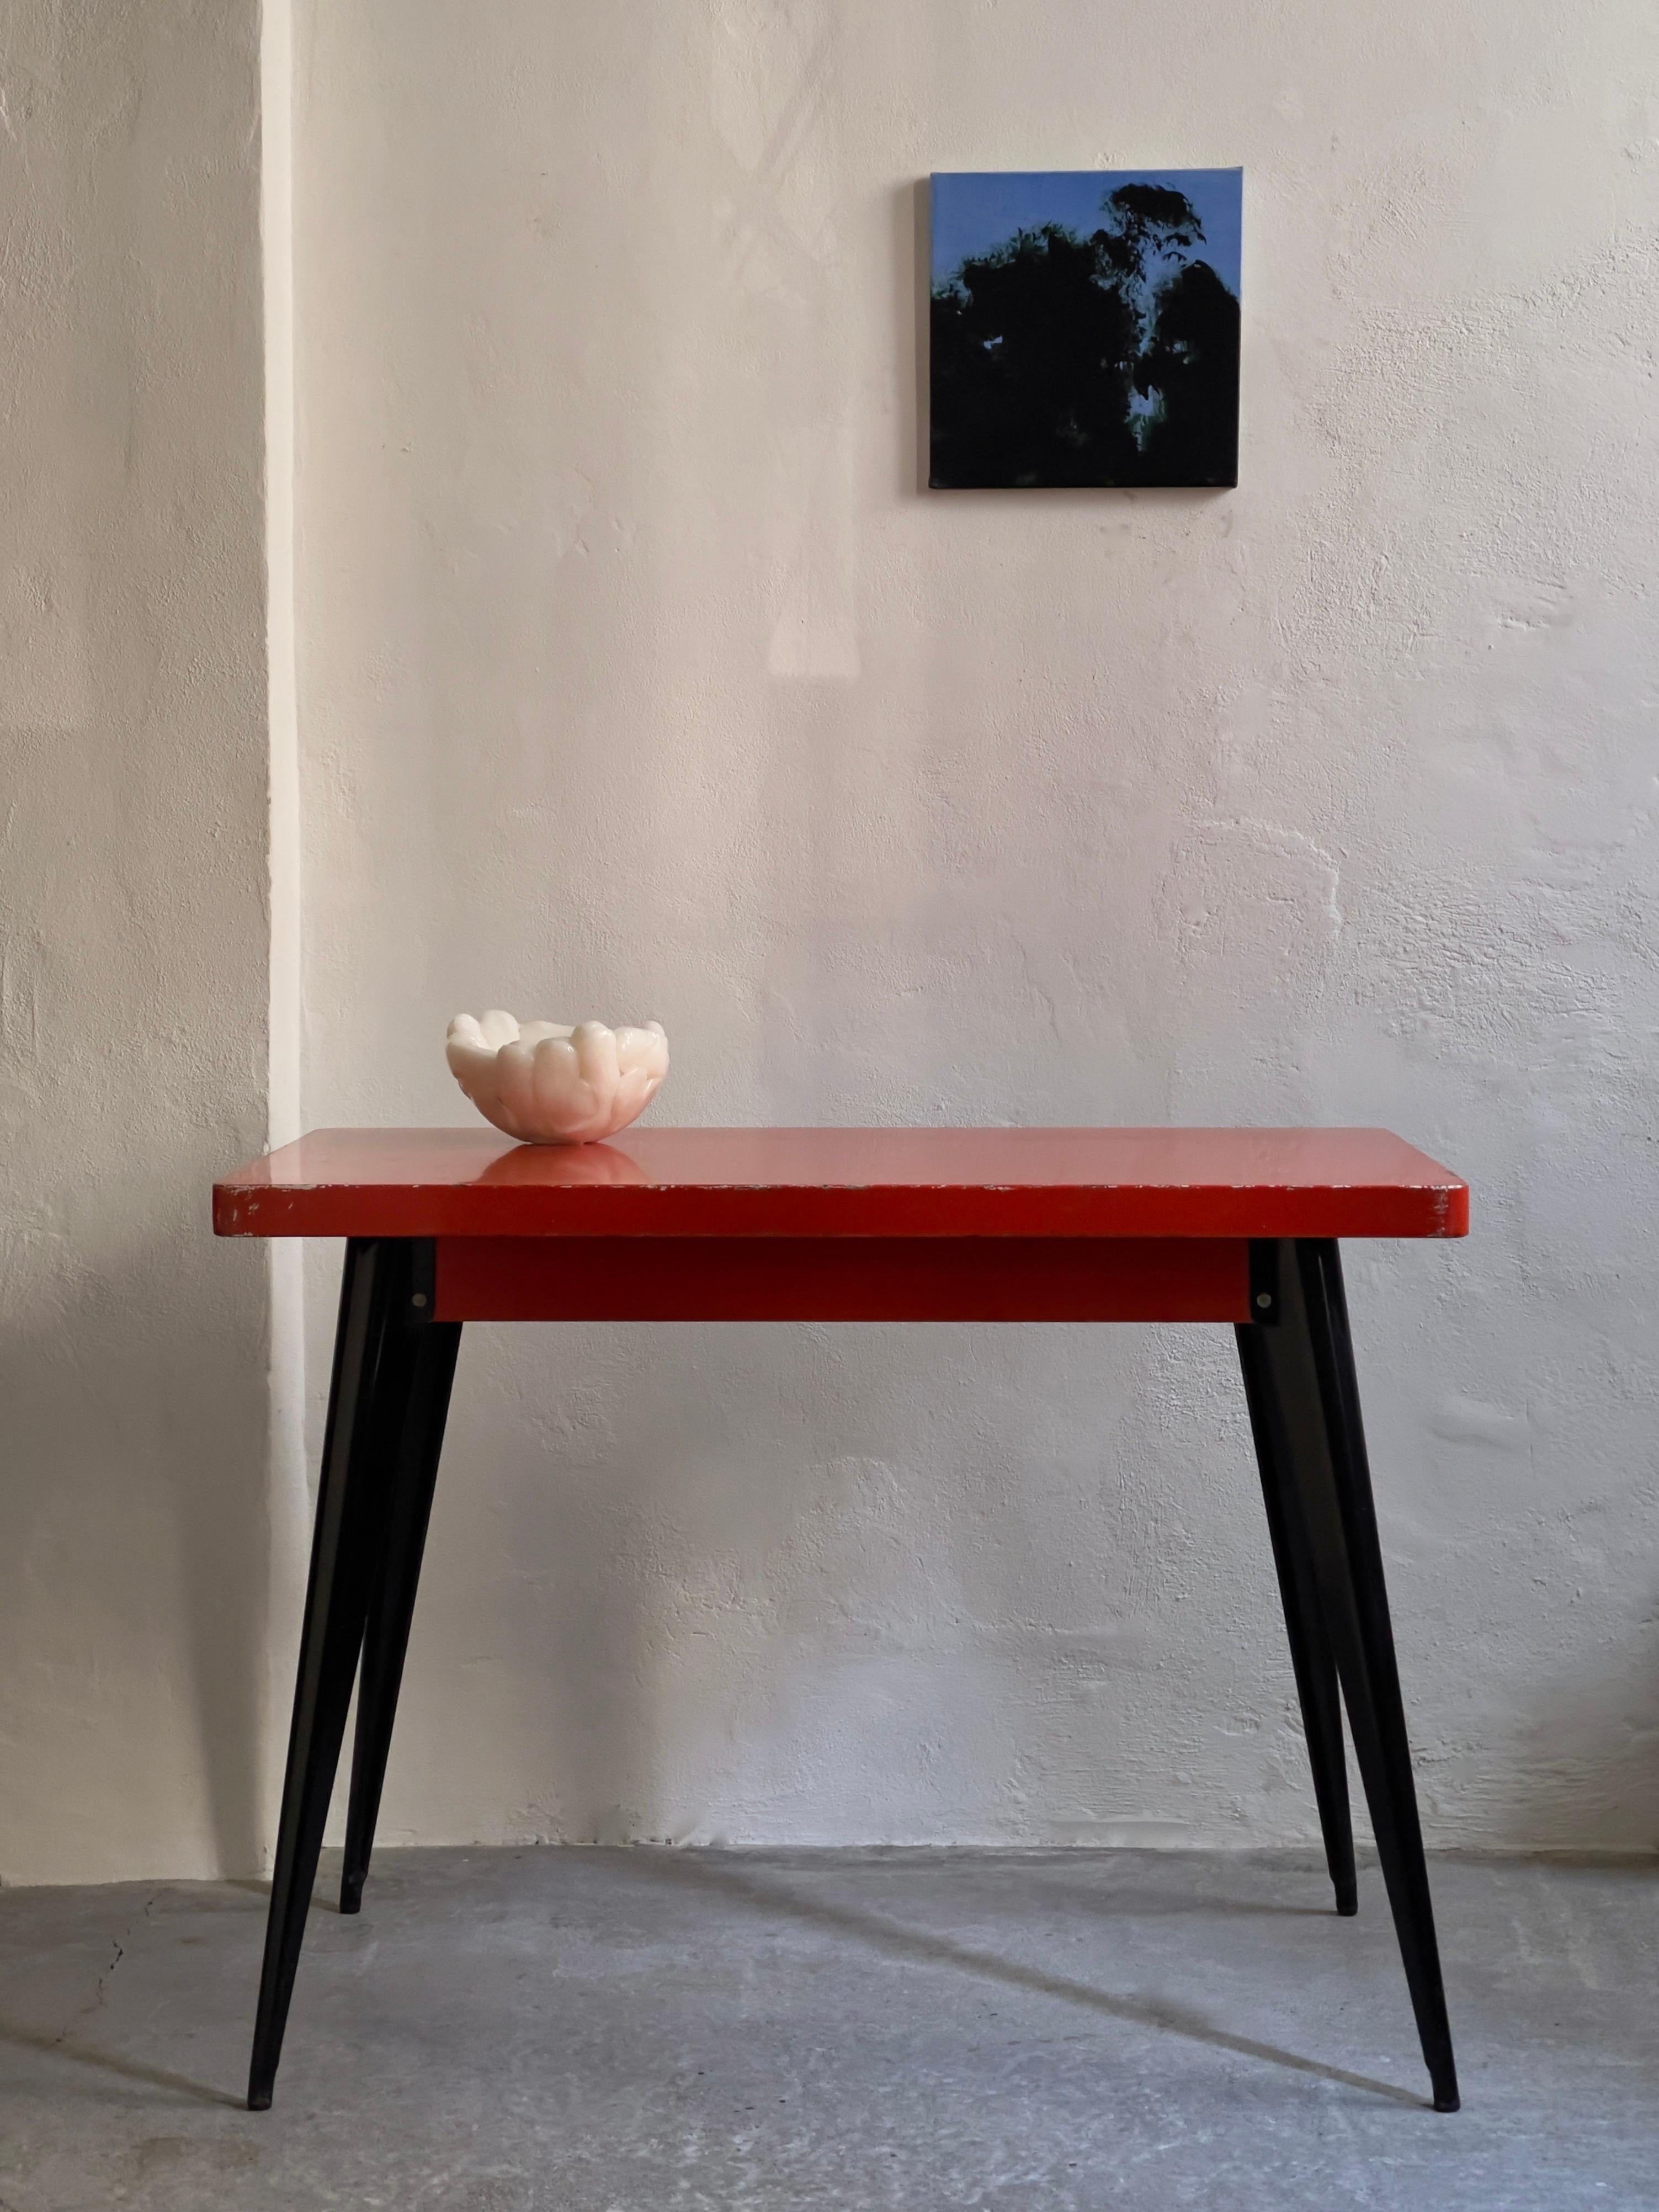 Original 1950s French metal desk in red varnish by Xavier Pouchard for Tolix T55 1